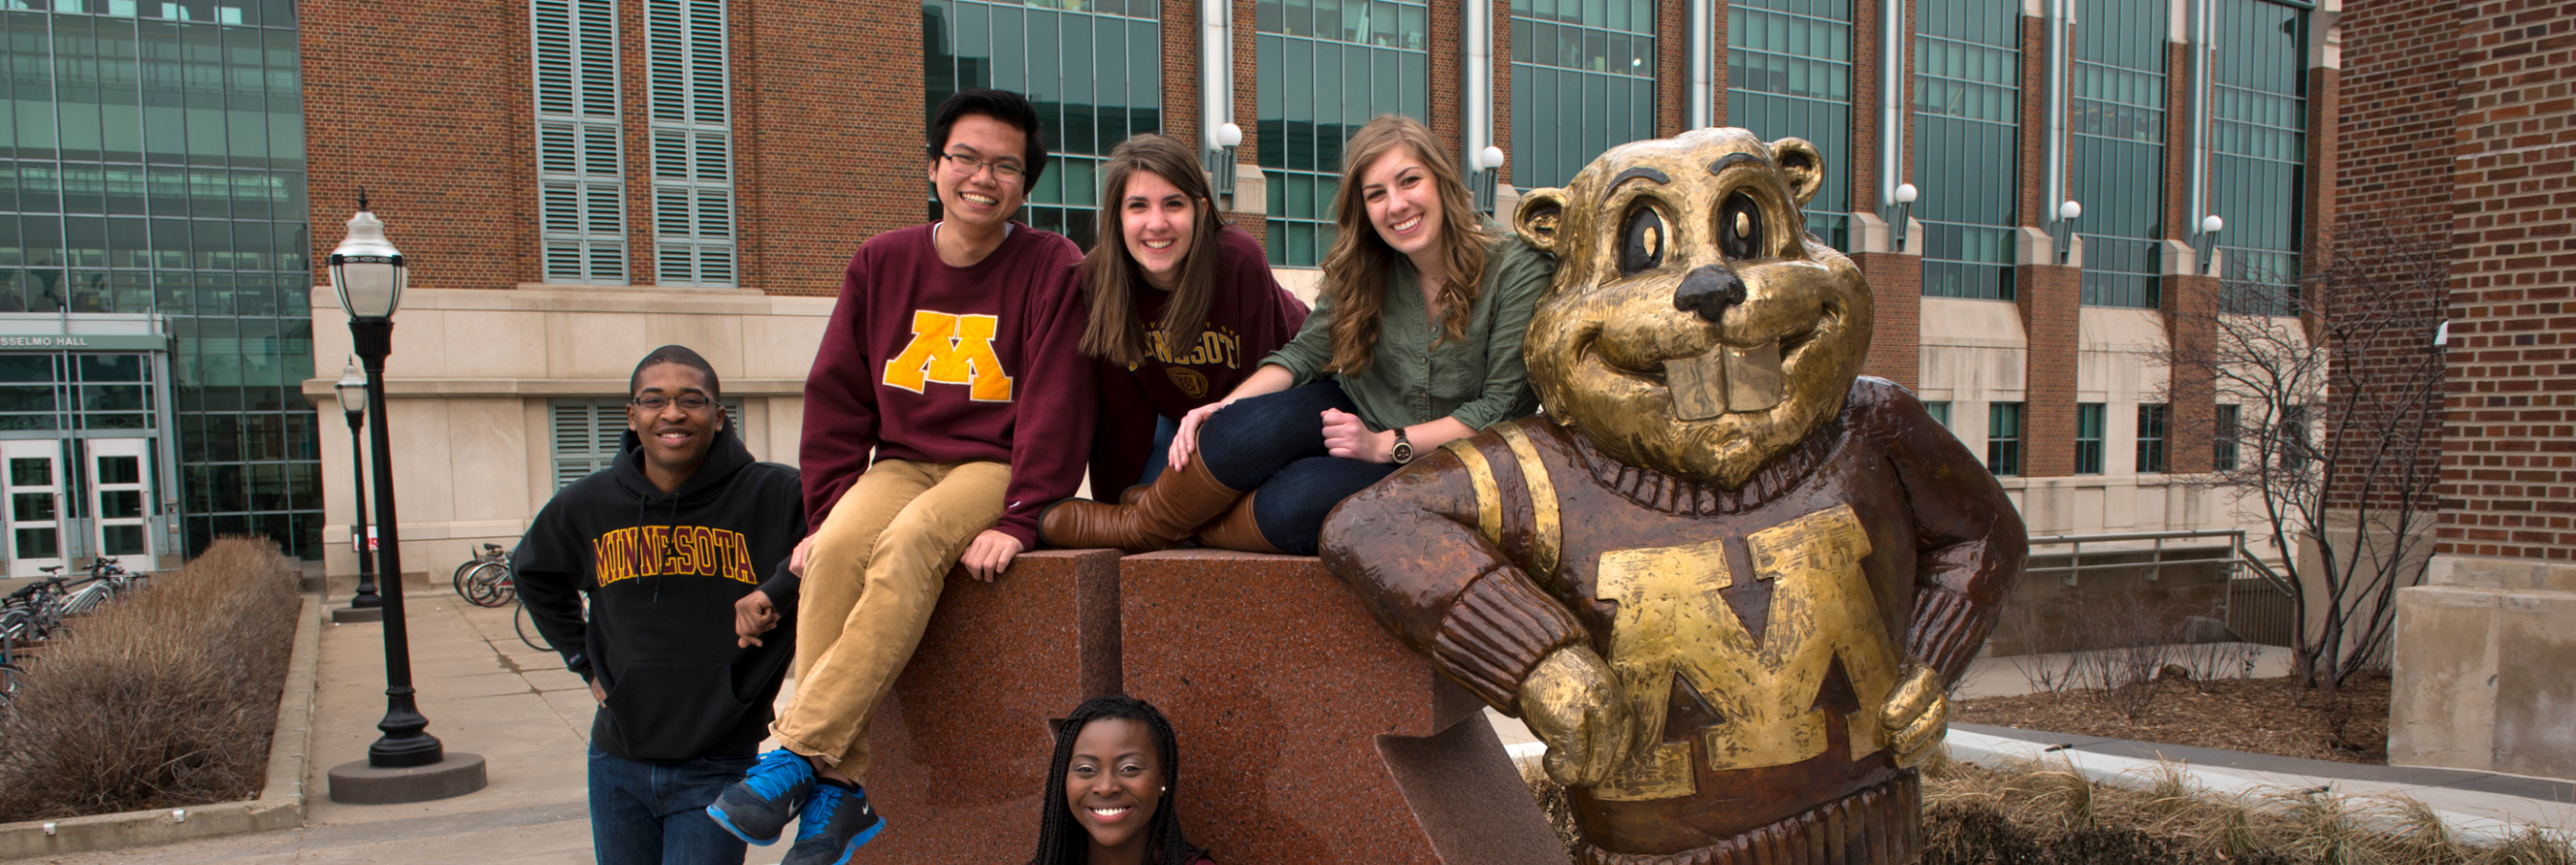 Students pose in front of the Block M Goldy statue